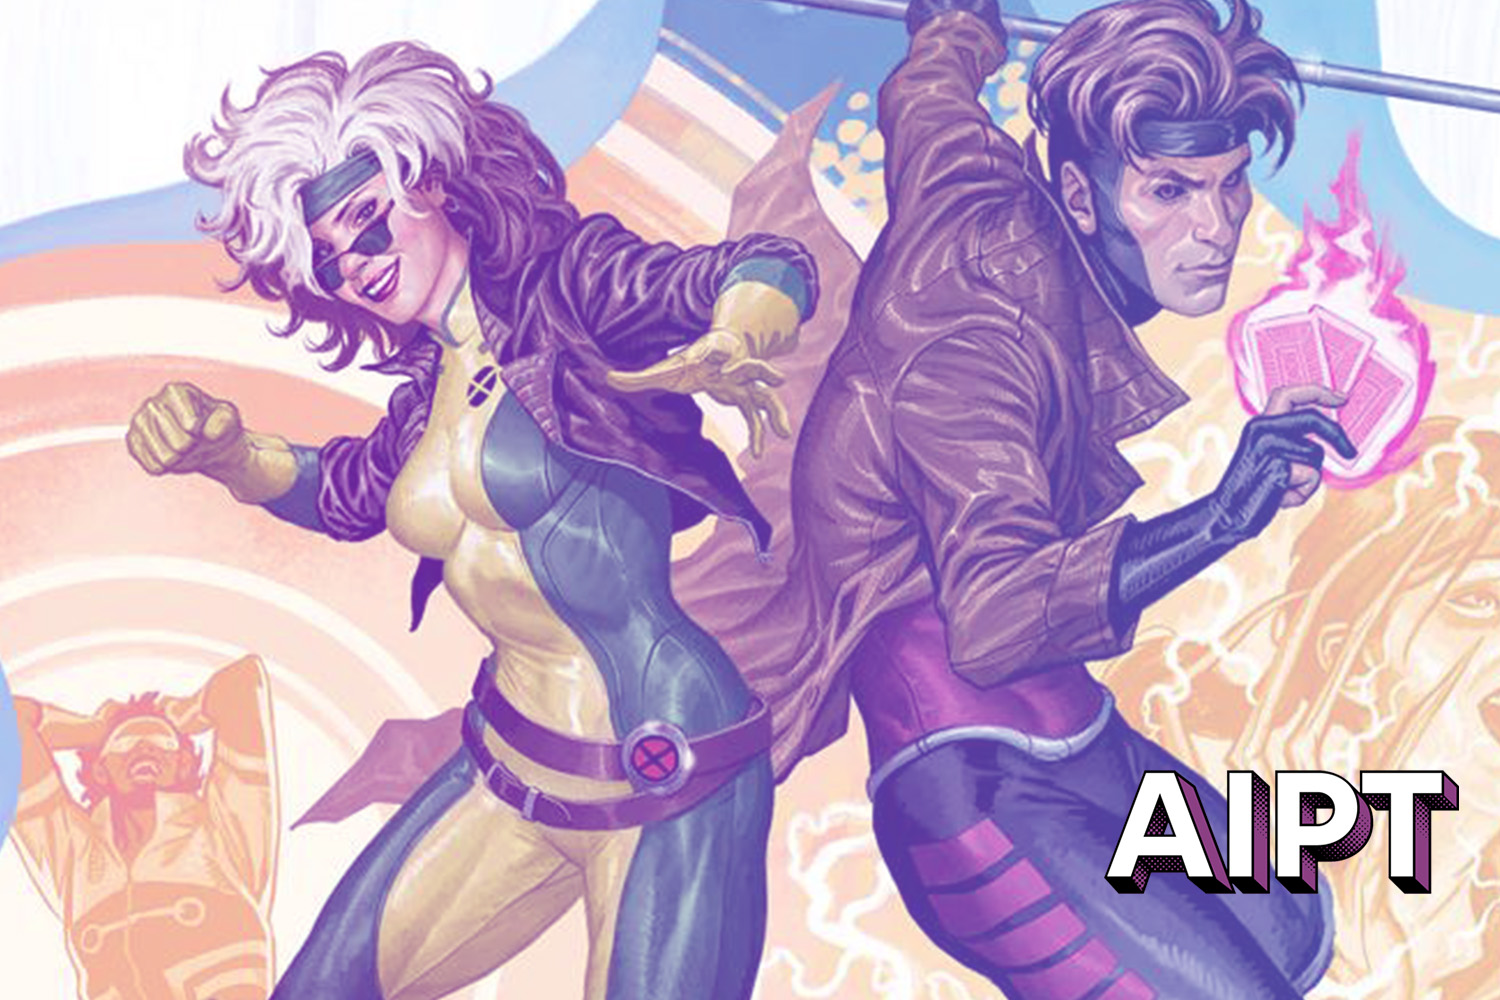 X-Men Monday Call for Questions - Stephanie Phillips for 'Rogue & Gambit'